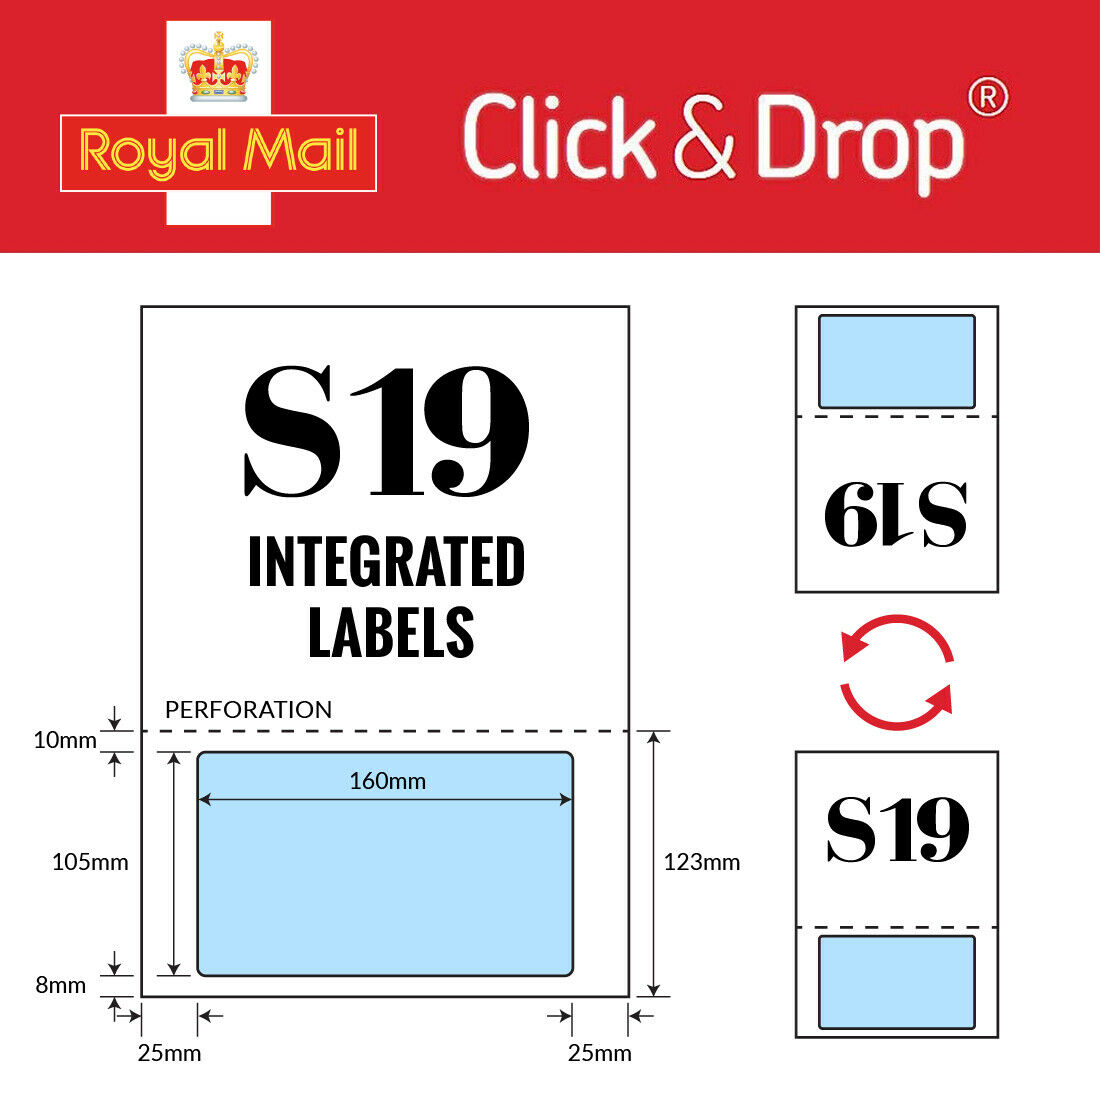 1000 Royal Mail Click and Drop Labels Integrated S19 160mm x105m